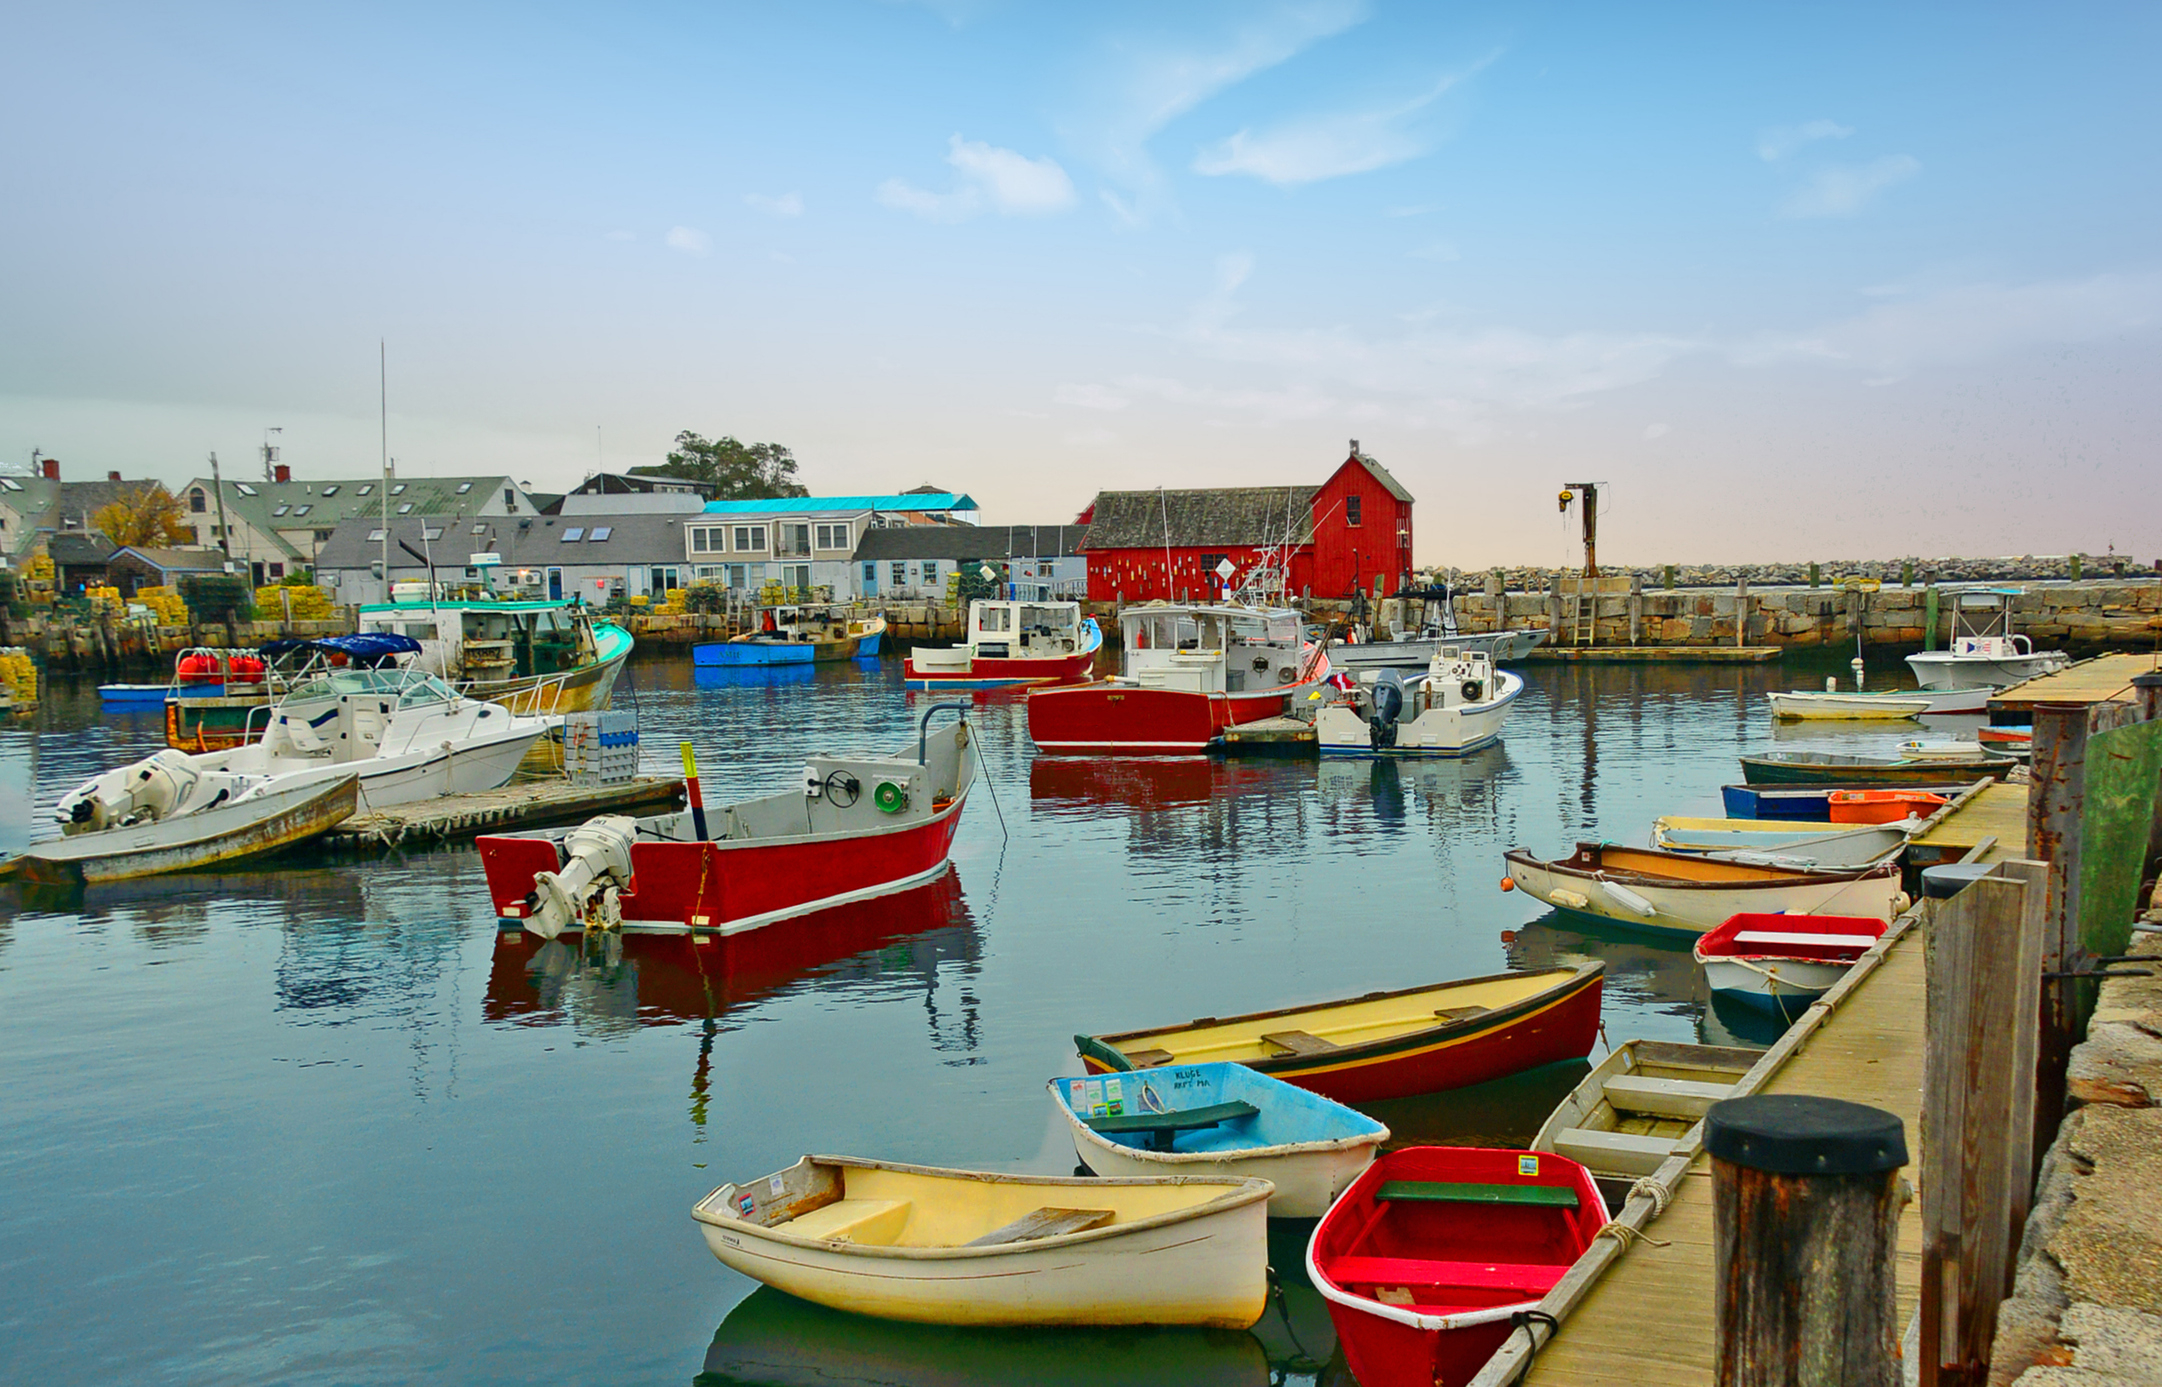 Fishing boats and dinghies docked by a waterfront with buildings and a red shack